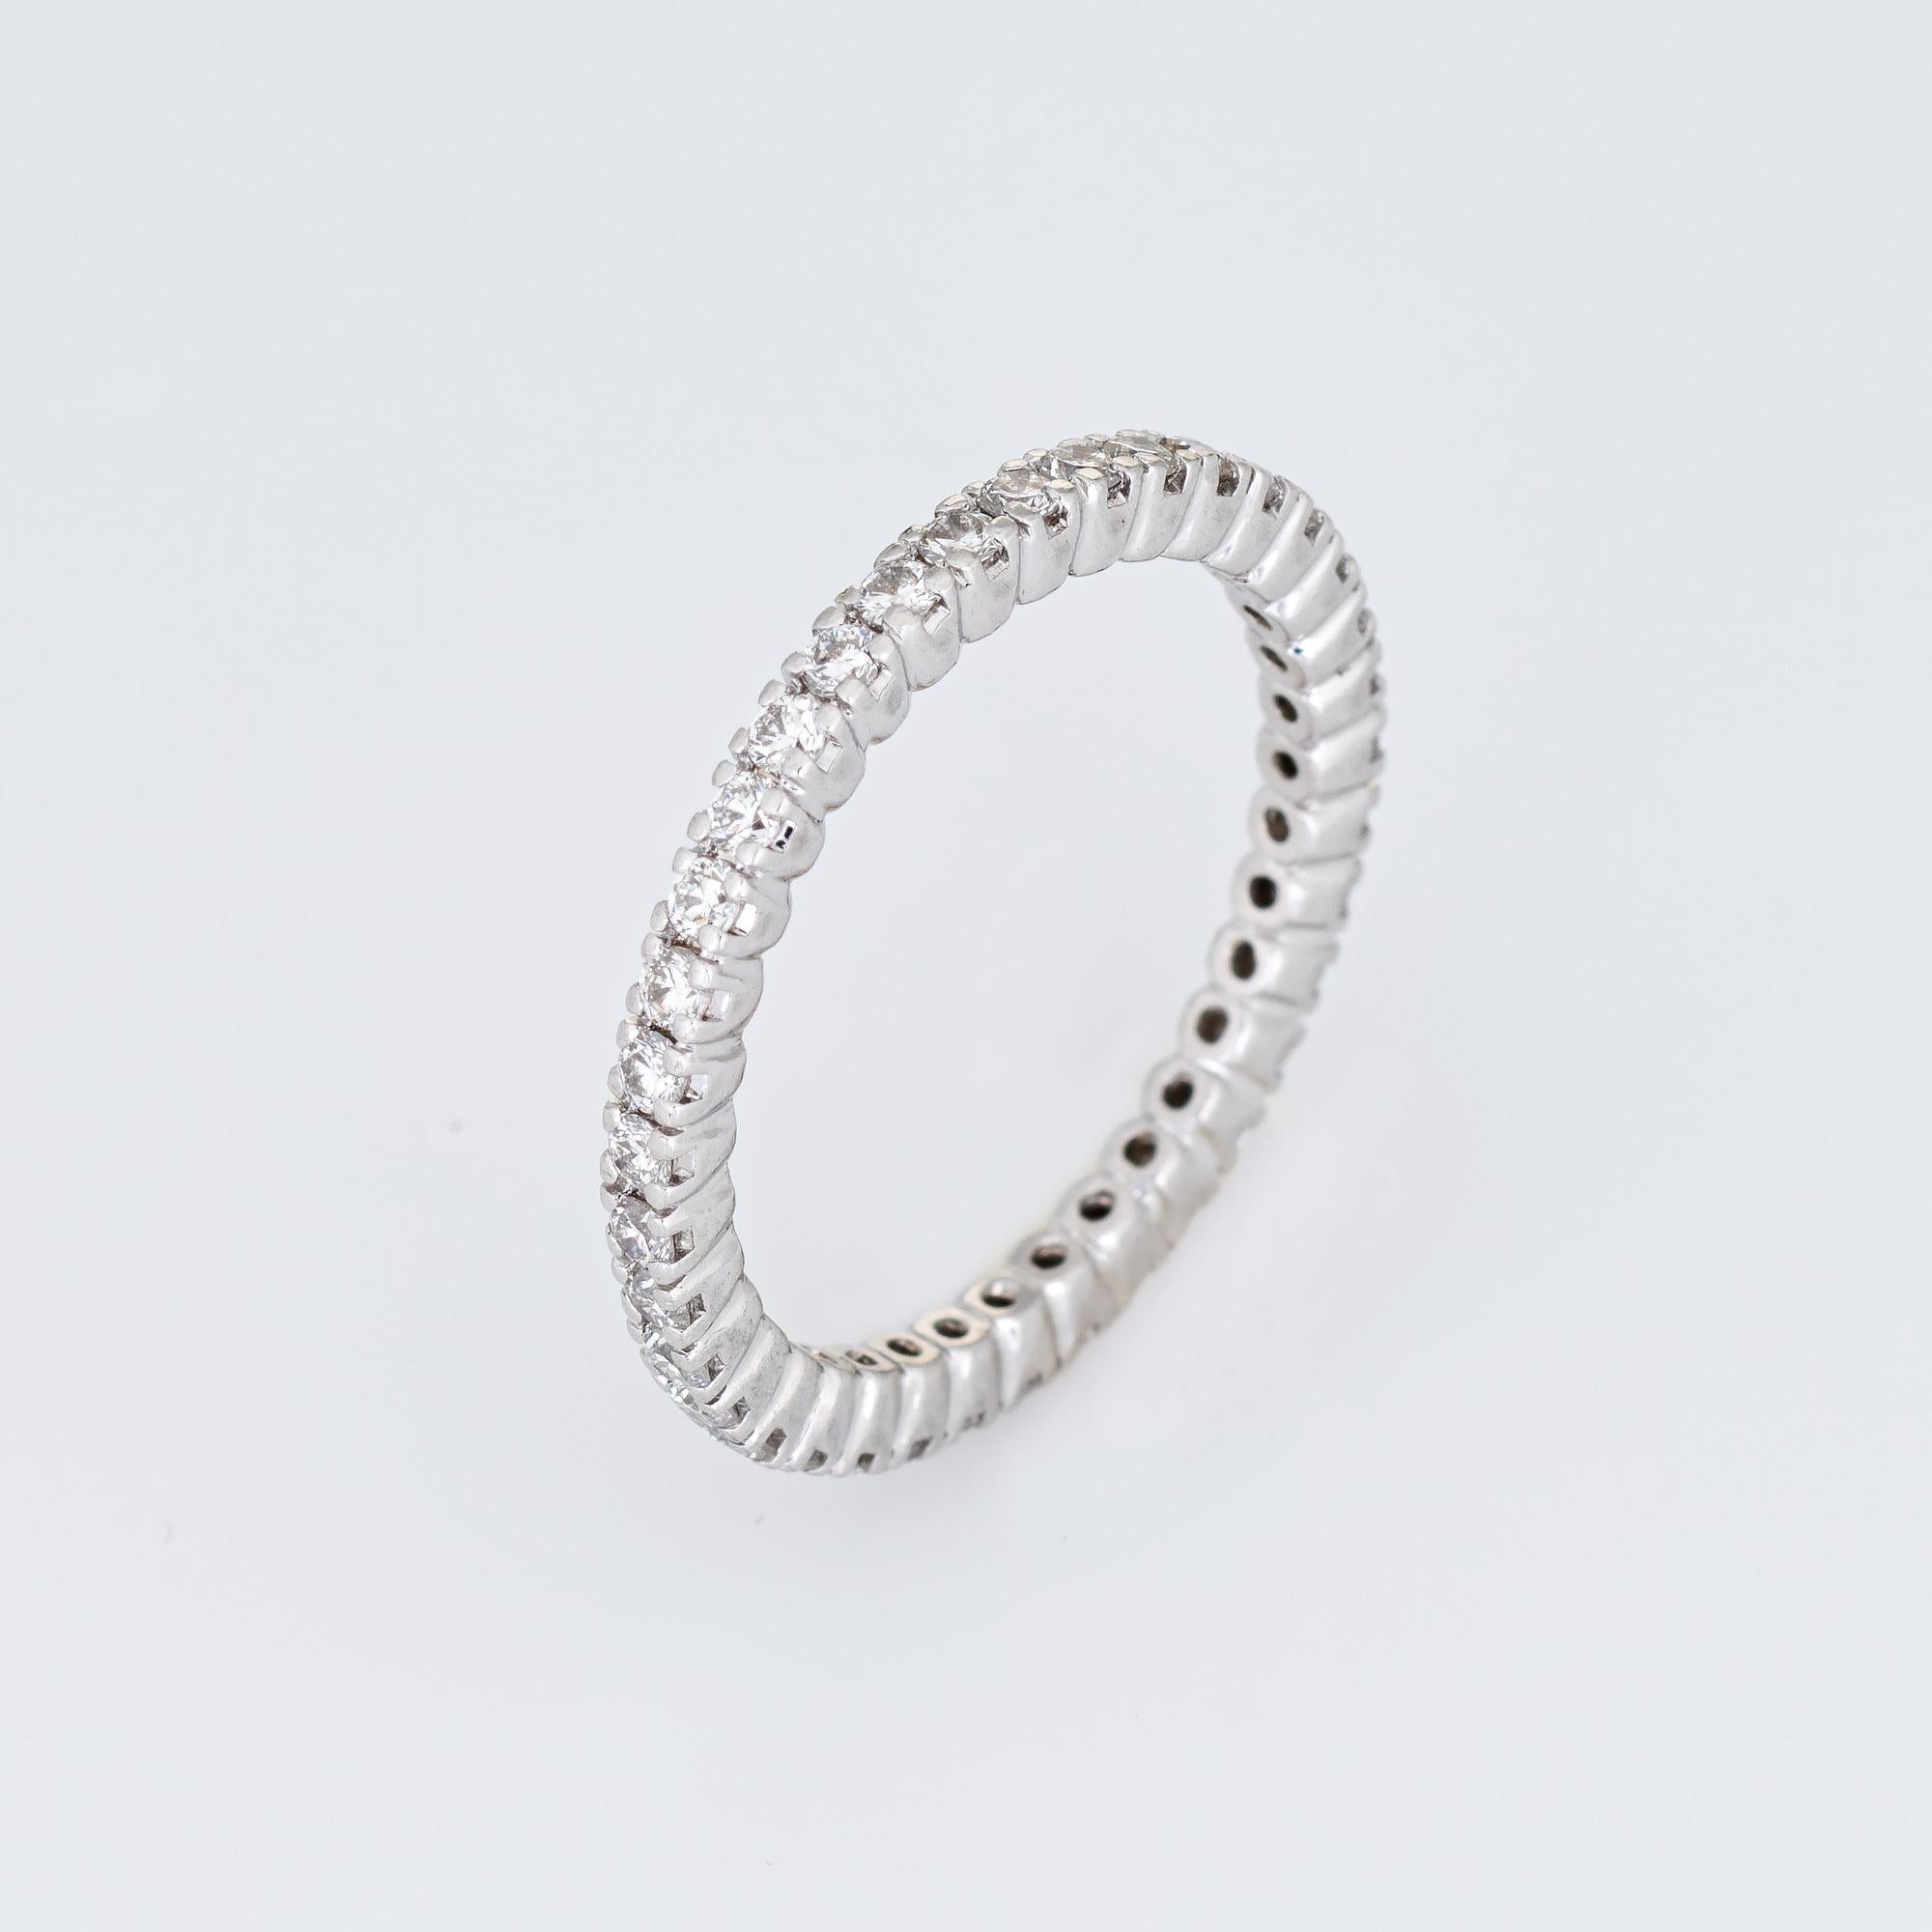 Stylish diamond eternity ring crafted in 900 platinum. 

A total of 38 round brilliant cut diamonds total an estimated 0.38 carats (estimated at H-I color and VS2-SI2 clarity). 

The simple and elegant band is set with full cut diamonds. It would